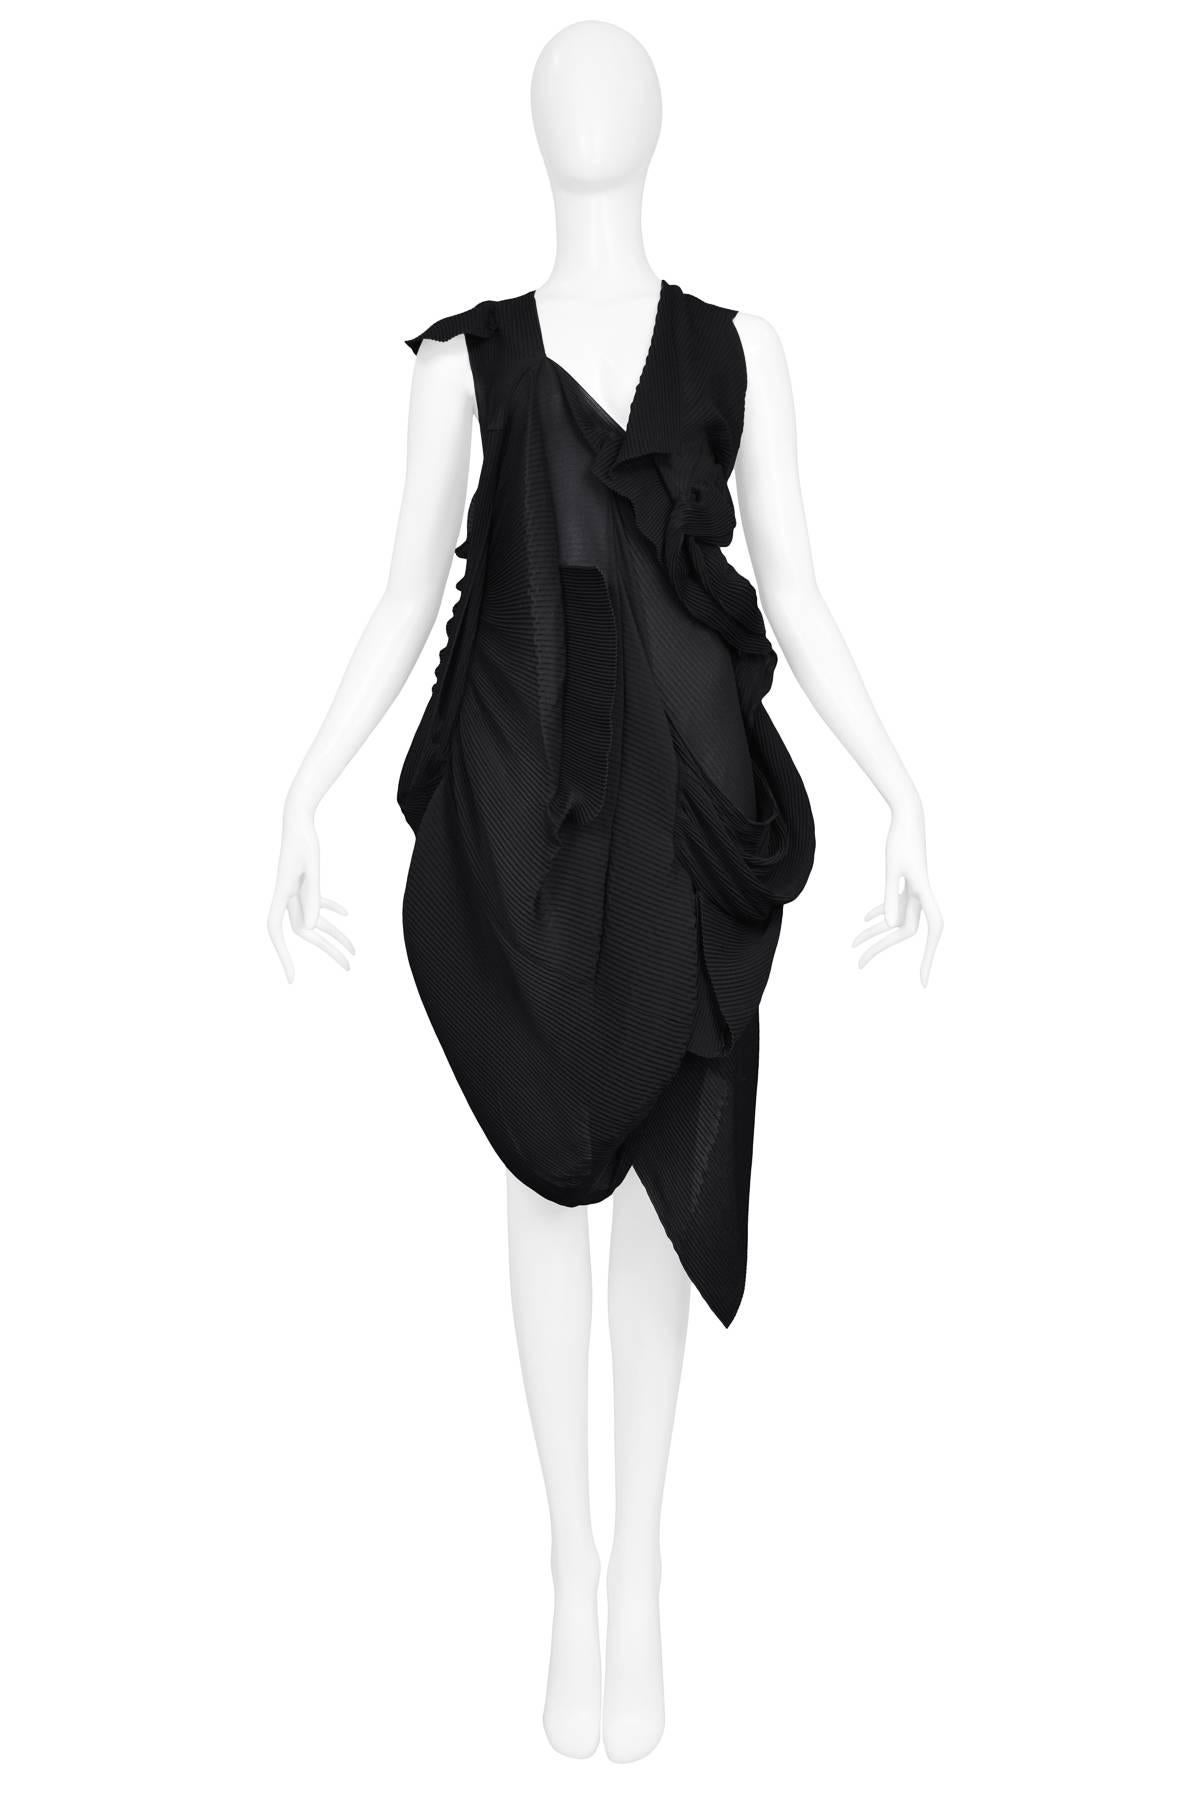 Junya Watanabe for Comme des Garcons black abstract cut-out dress featuring Fortuny style pleats that drape throughout. Autumn/Winter 2010 Collection. 

Excellent Condiiton.

Size: X-Small